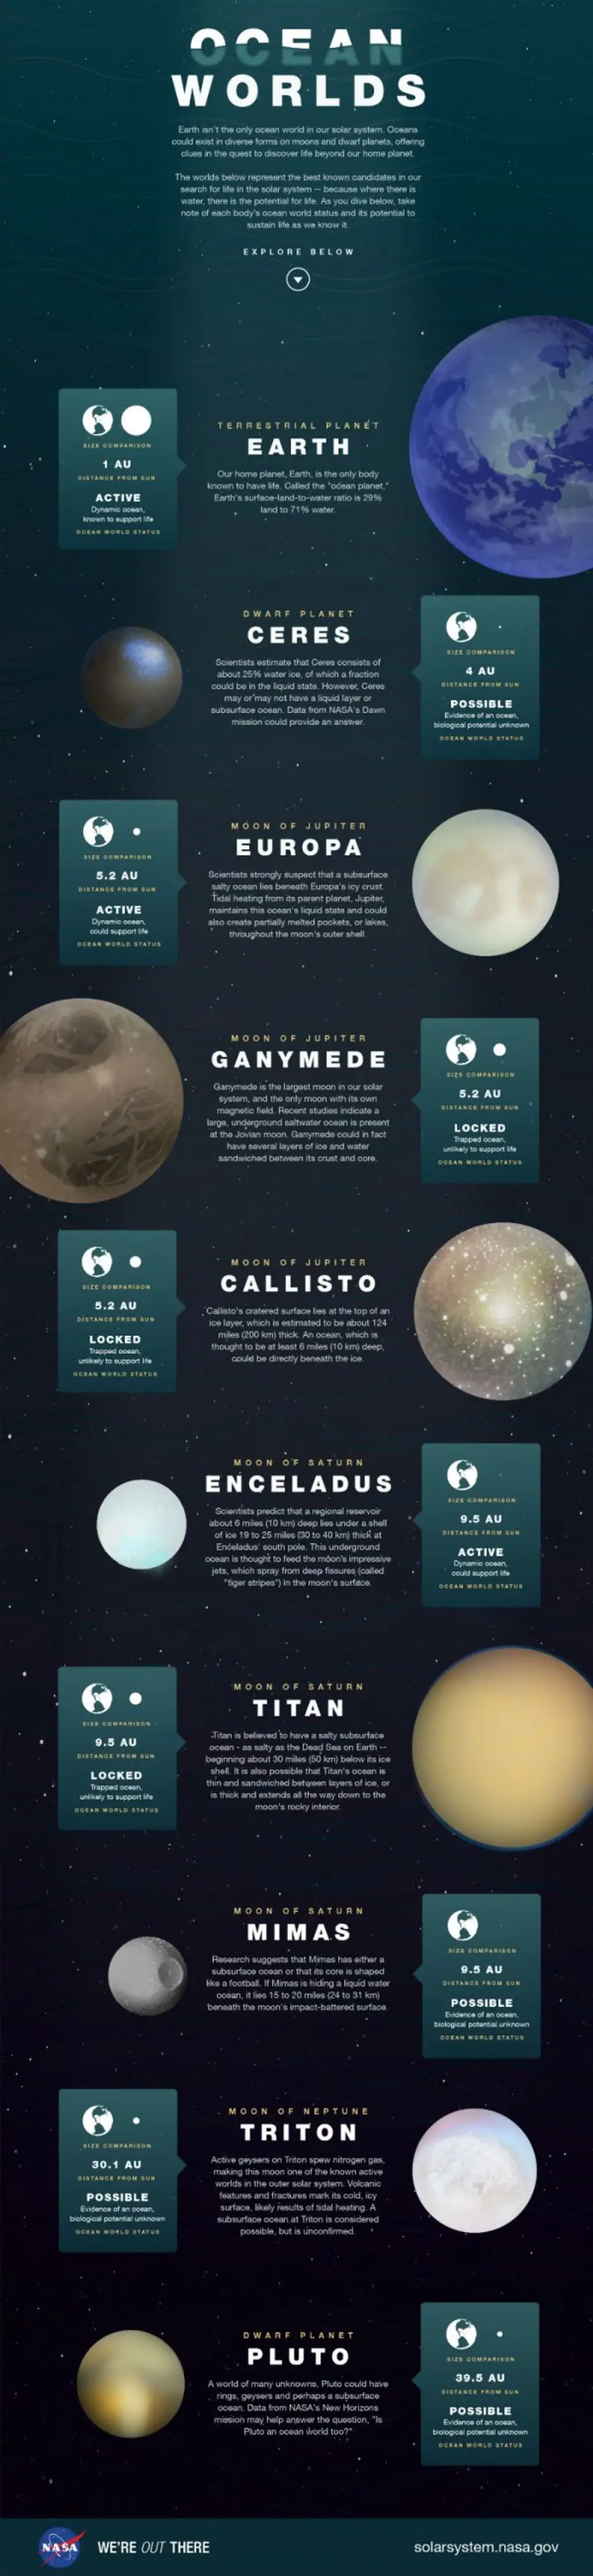 Here's How Wet Our Solar System is